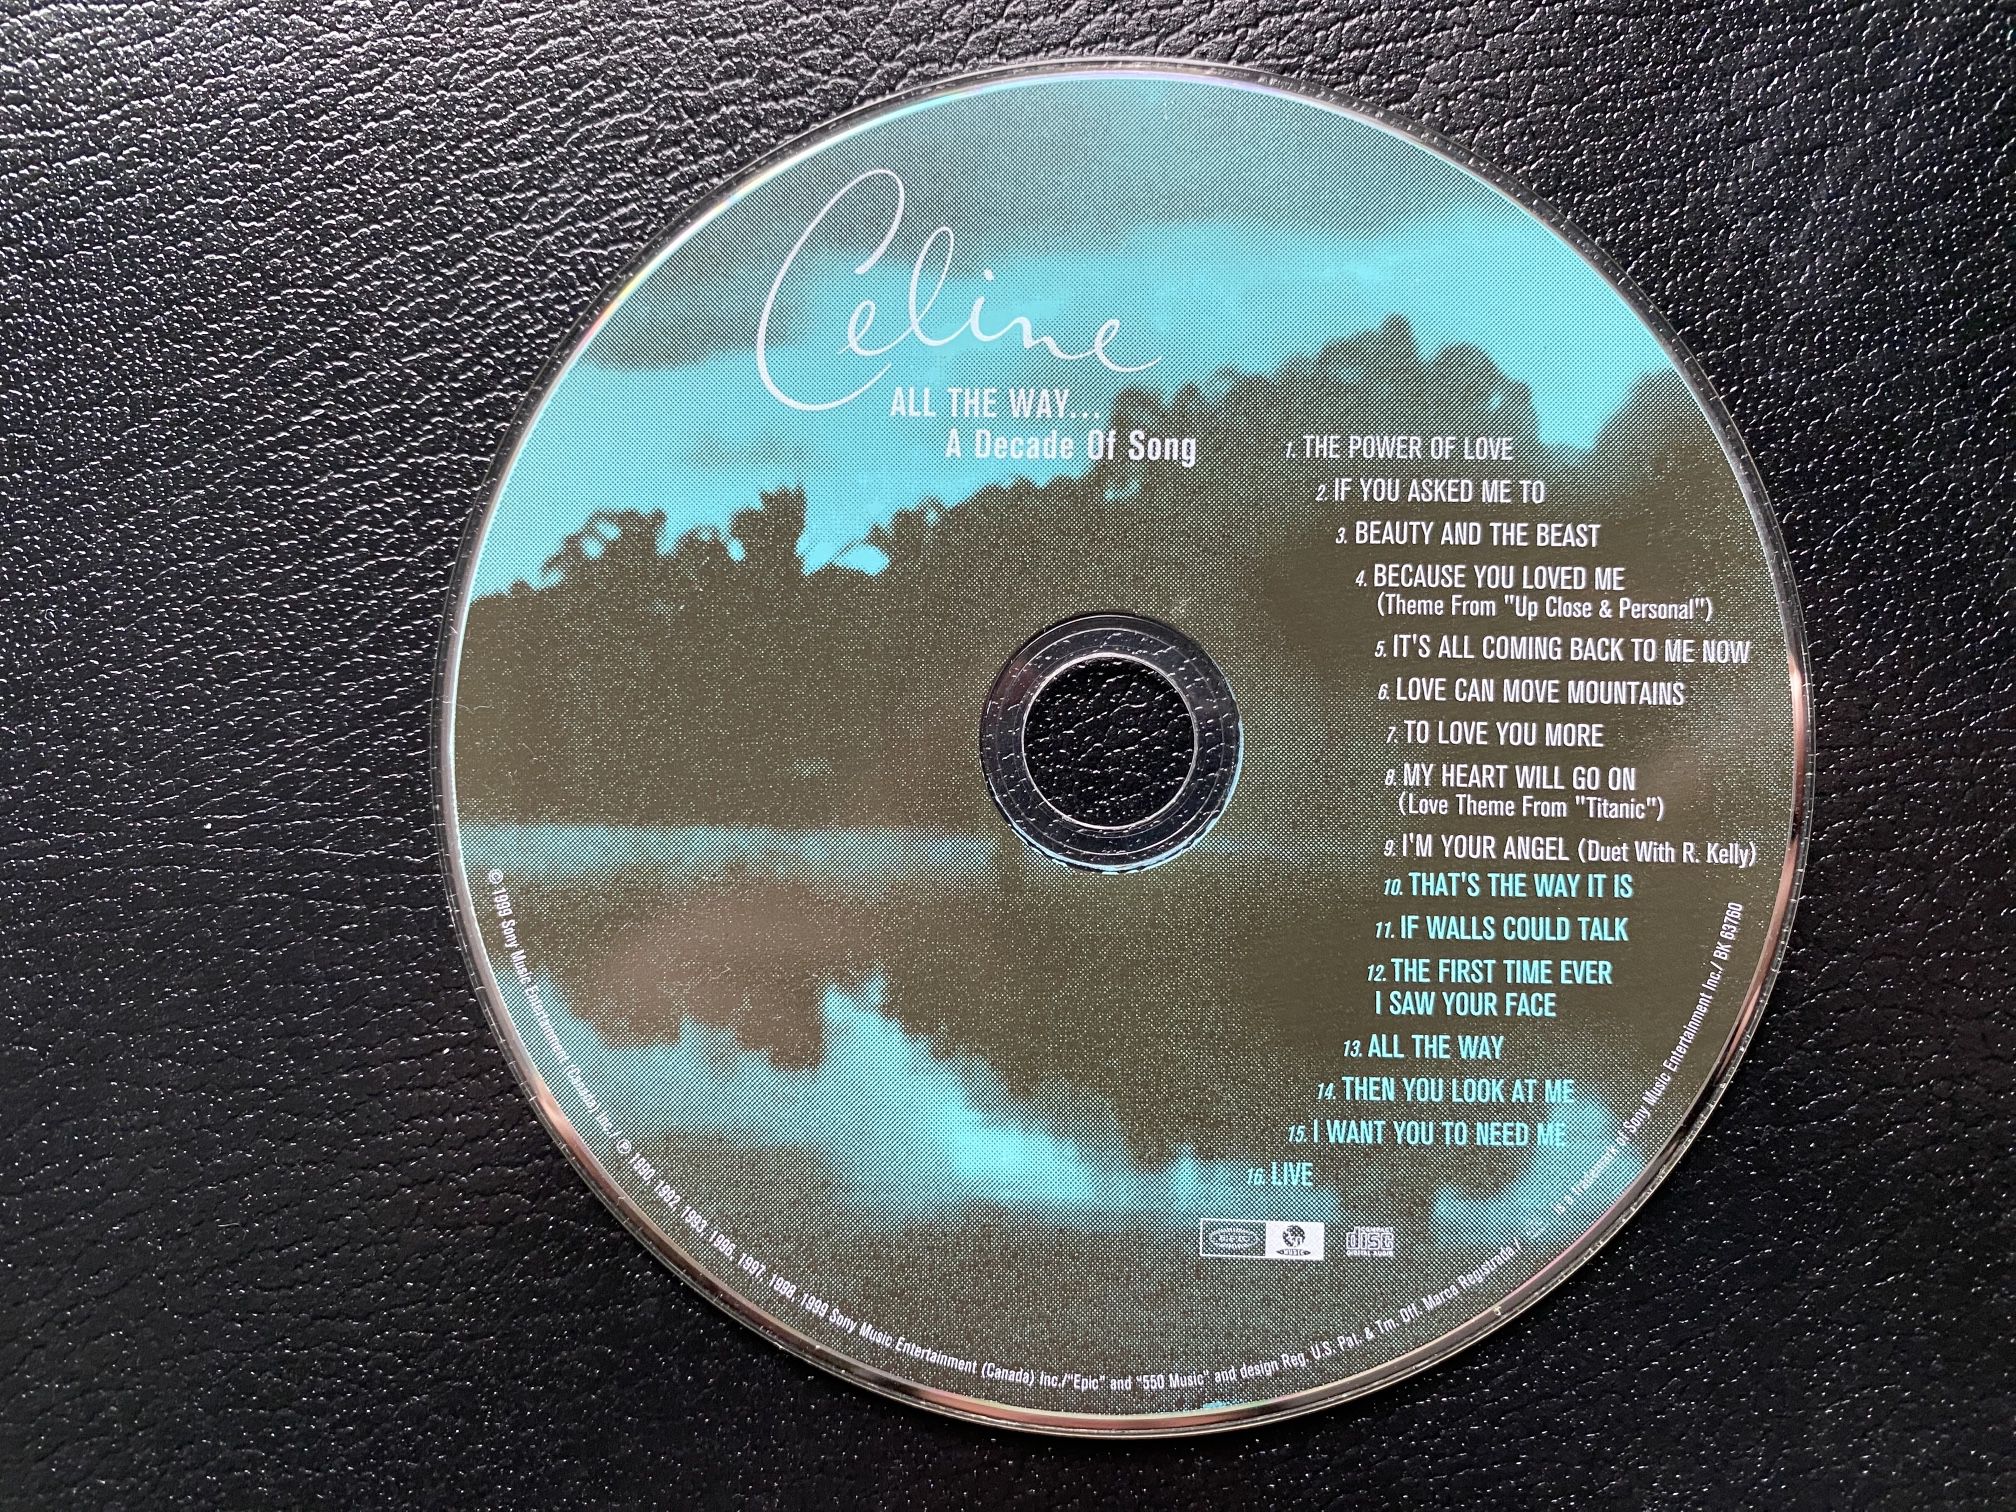 Celine Dion - All the Way... A Decade of Song CD